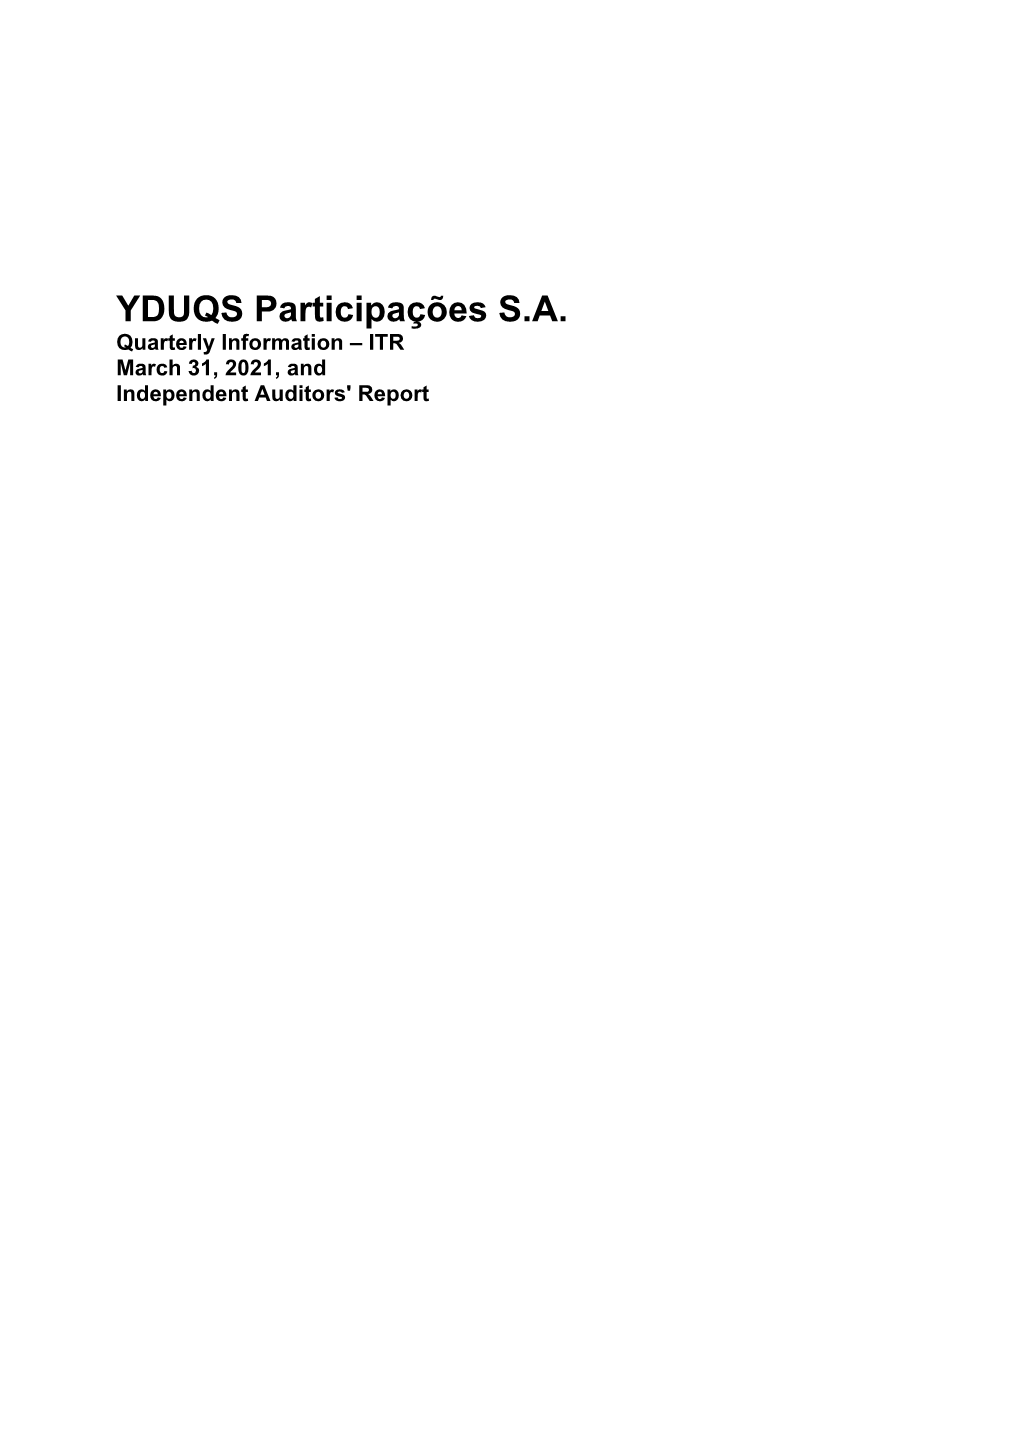 YDUQS Participações S.A. Quarterly Information – ITR March 31, 2021, and Independent Auditors' Report